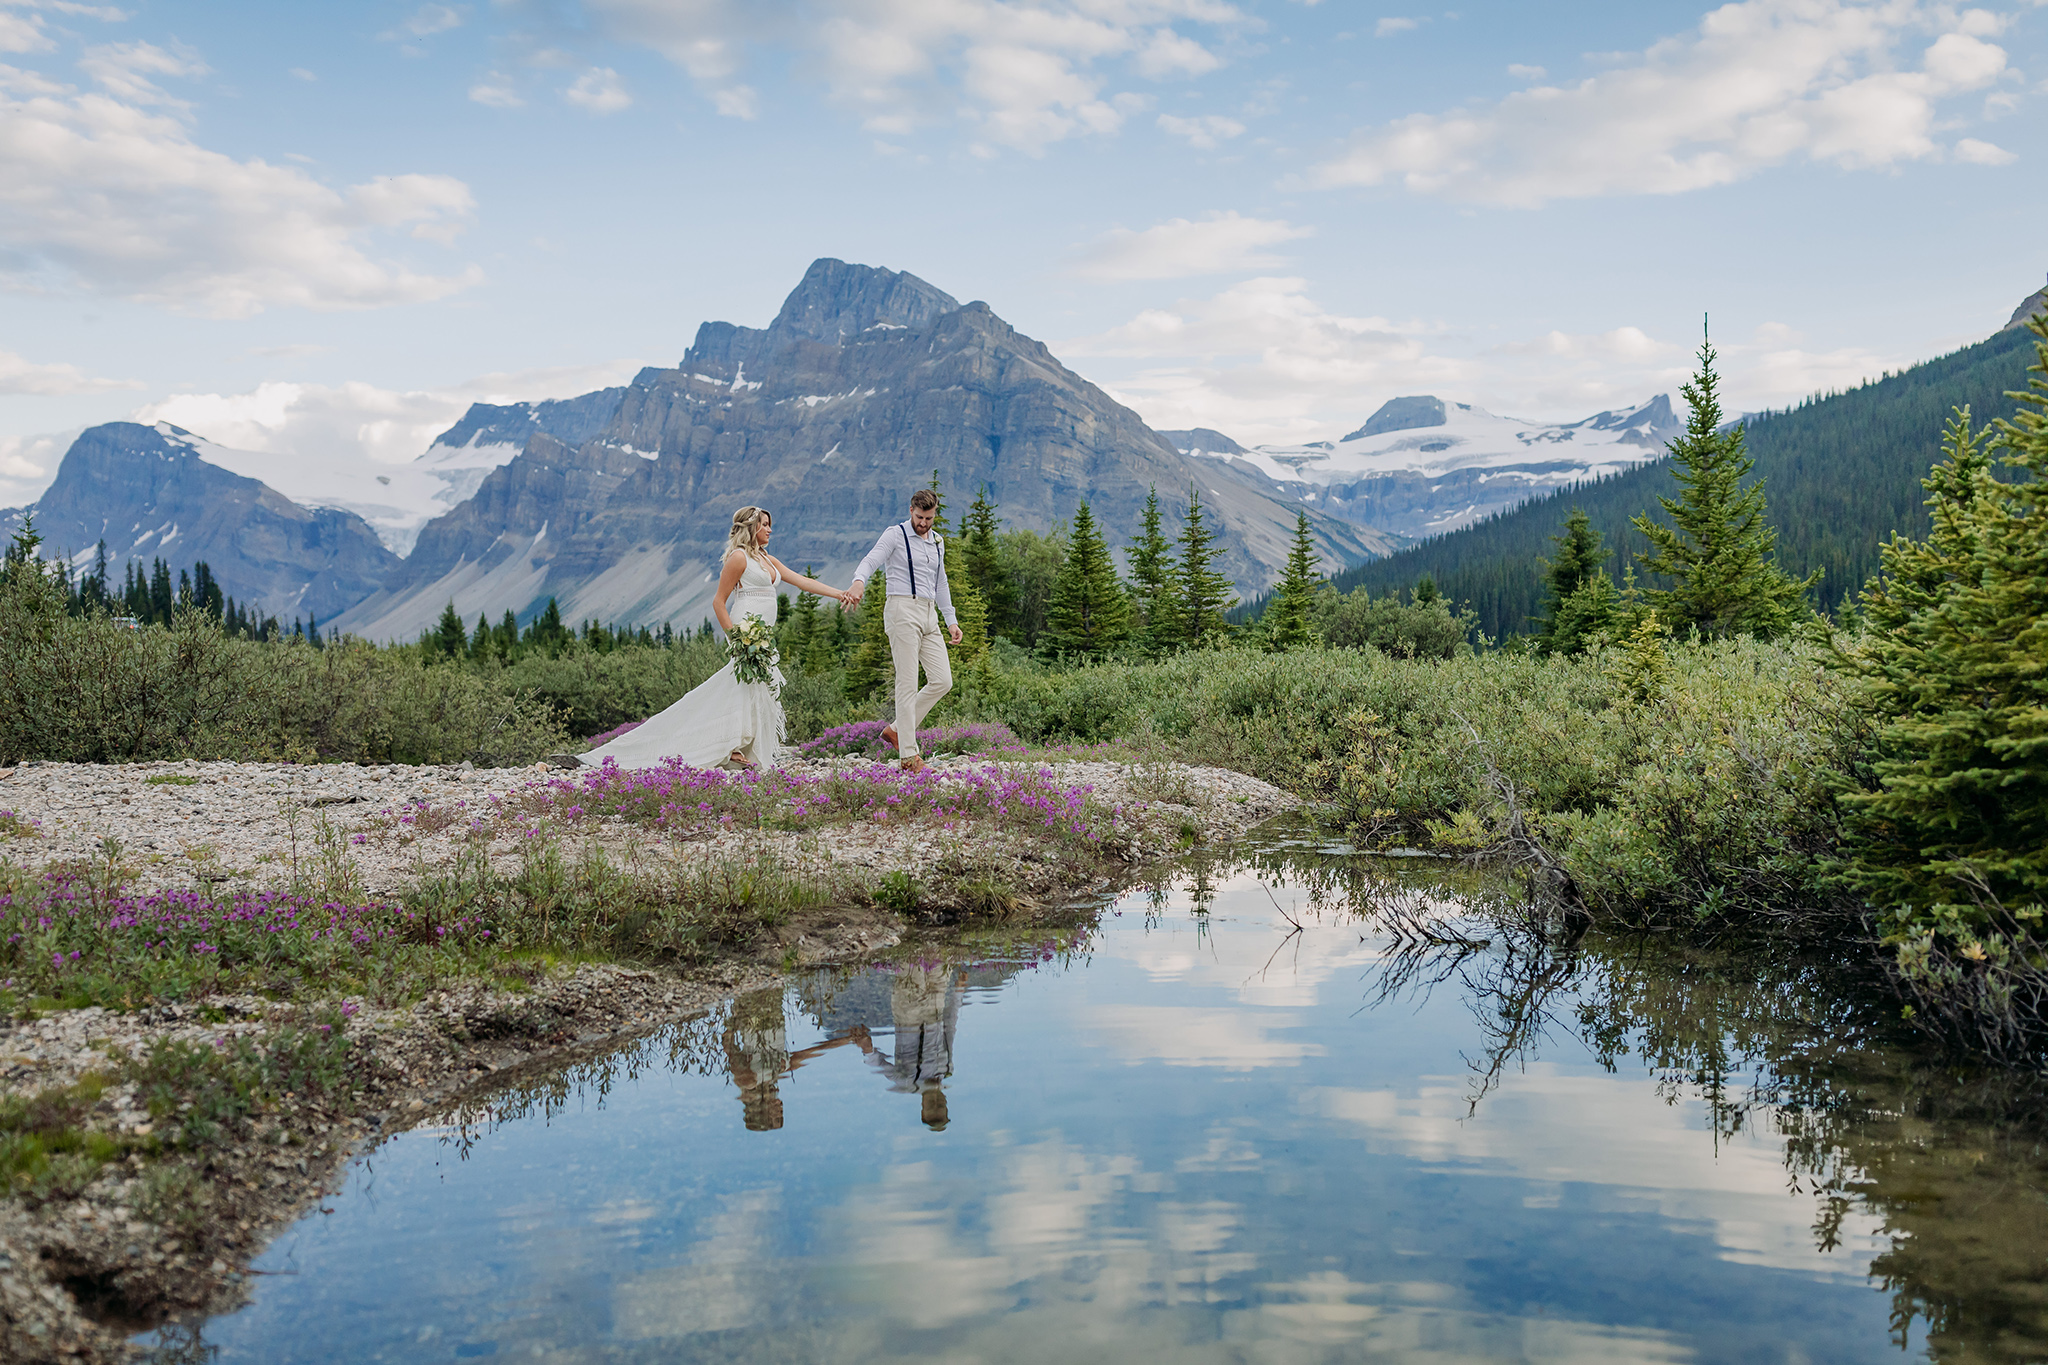 Icefields Parkway elopement in Summer with wildflowers, amazing reflection & epic mountain views all around photographed by ENV Photography